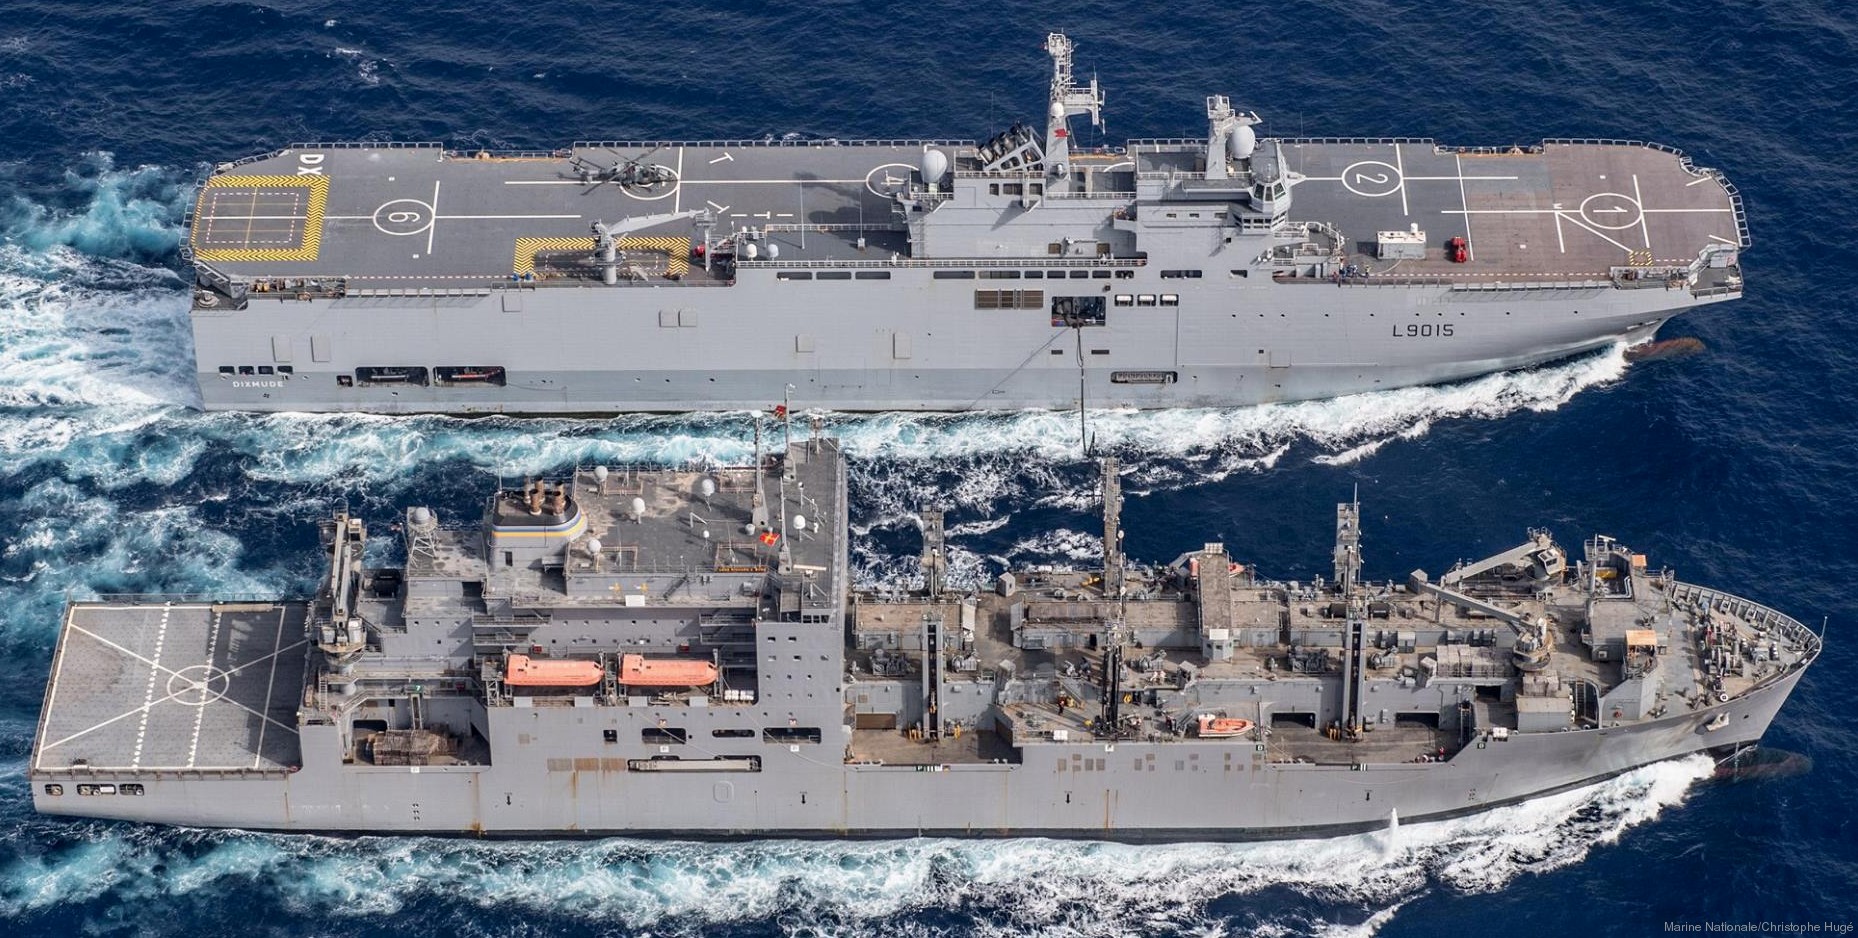 l-9015 fs dixmude mistral class amphibious assault command ship bpc french navy marine nationale 17